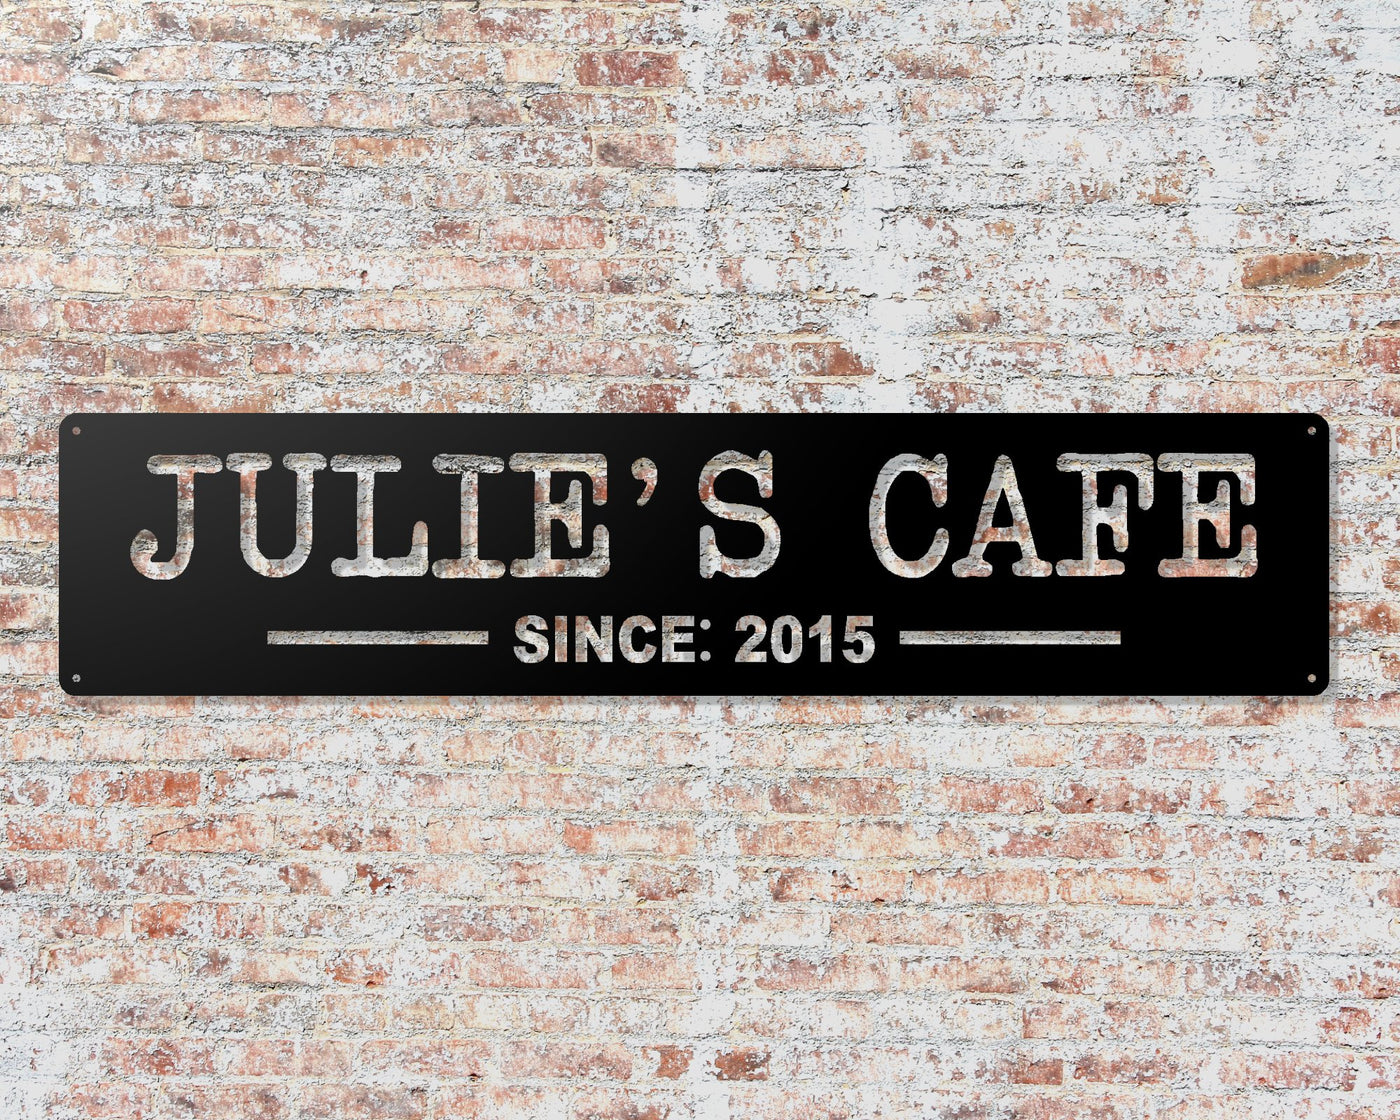 Personalized Cafe Metal Sign with Name and EST. Date - Madison Iron and Wood - Personalized sign - metal outdoor decor - Steel deocrations - american made products - veteran owned business products - fencing decorations - fencing supplies - custom wall decorations - personalized wall signs - steel - decorative post caps - steel post caps - metal post caps - brackets - structural brackets - home improvement - easter - easter decorations - easter gift - easter yard decor